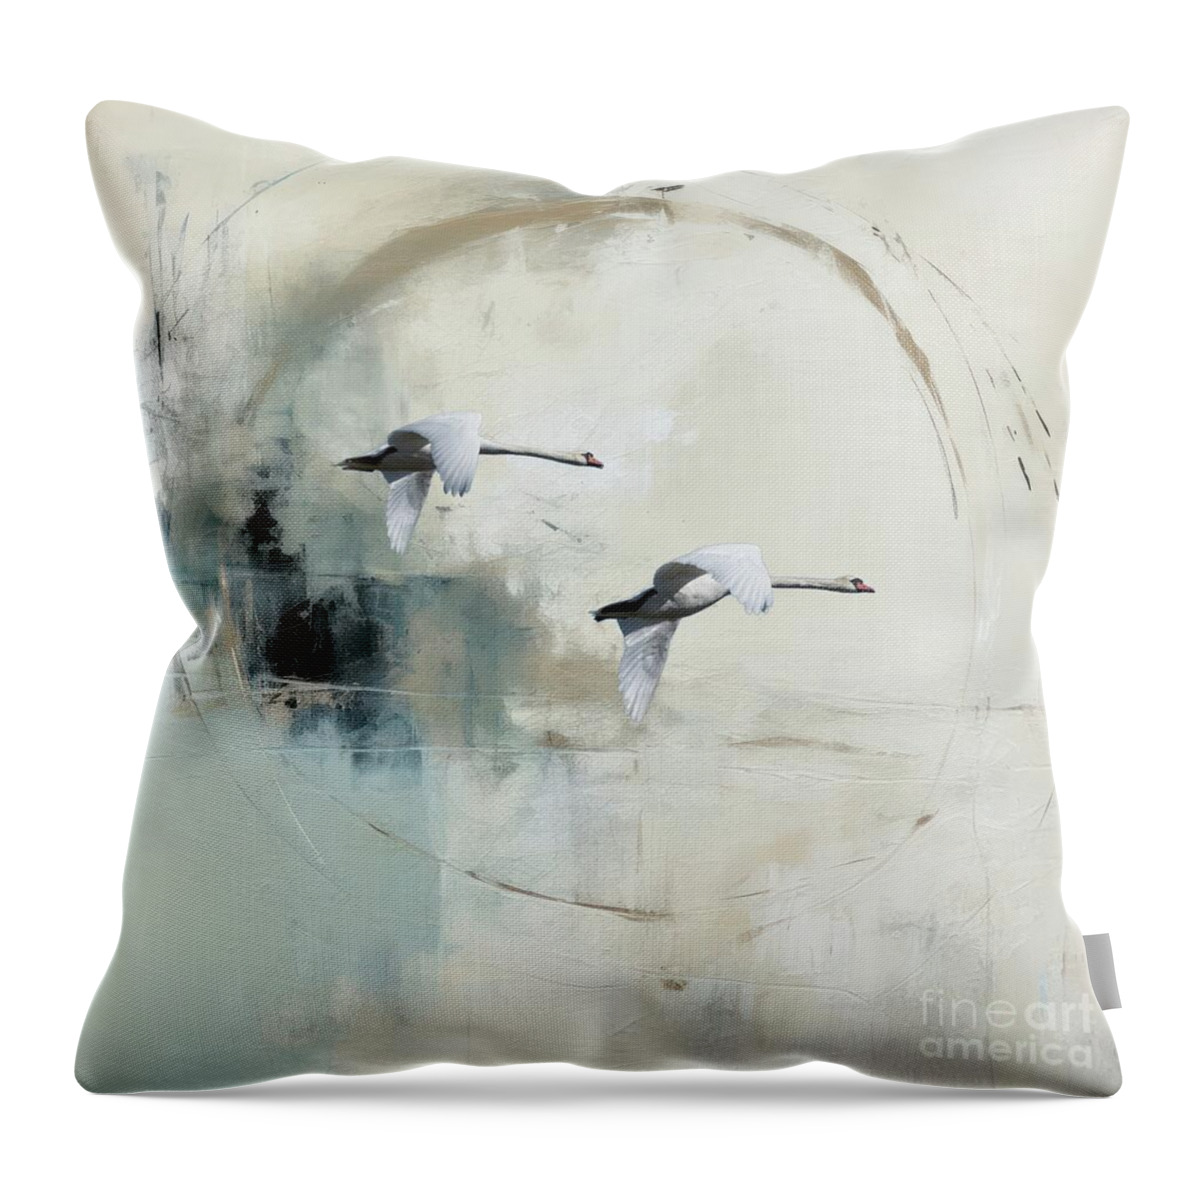 Swans Throw Pillow featuring the mixed media Mute Swans Flying by Eva Lechner